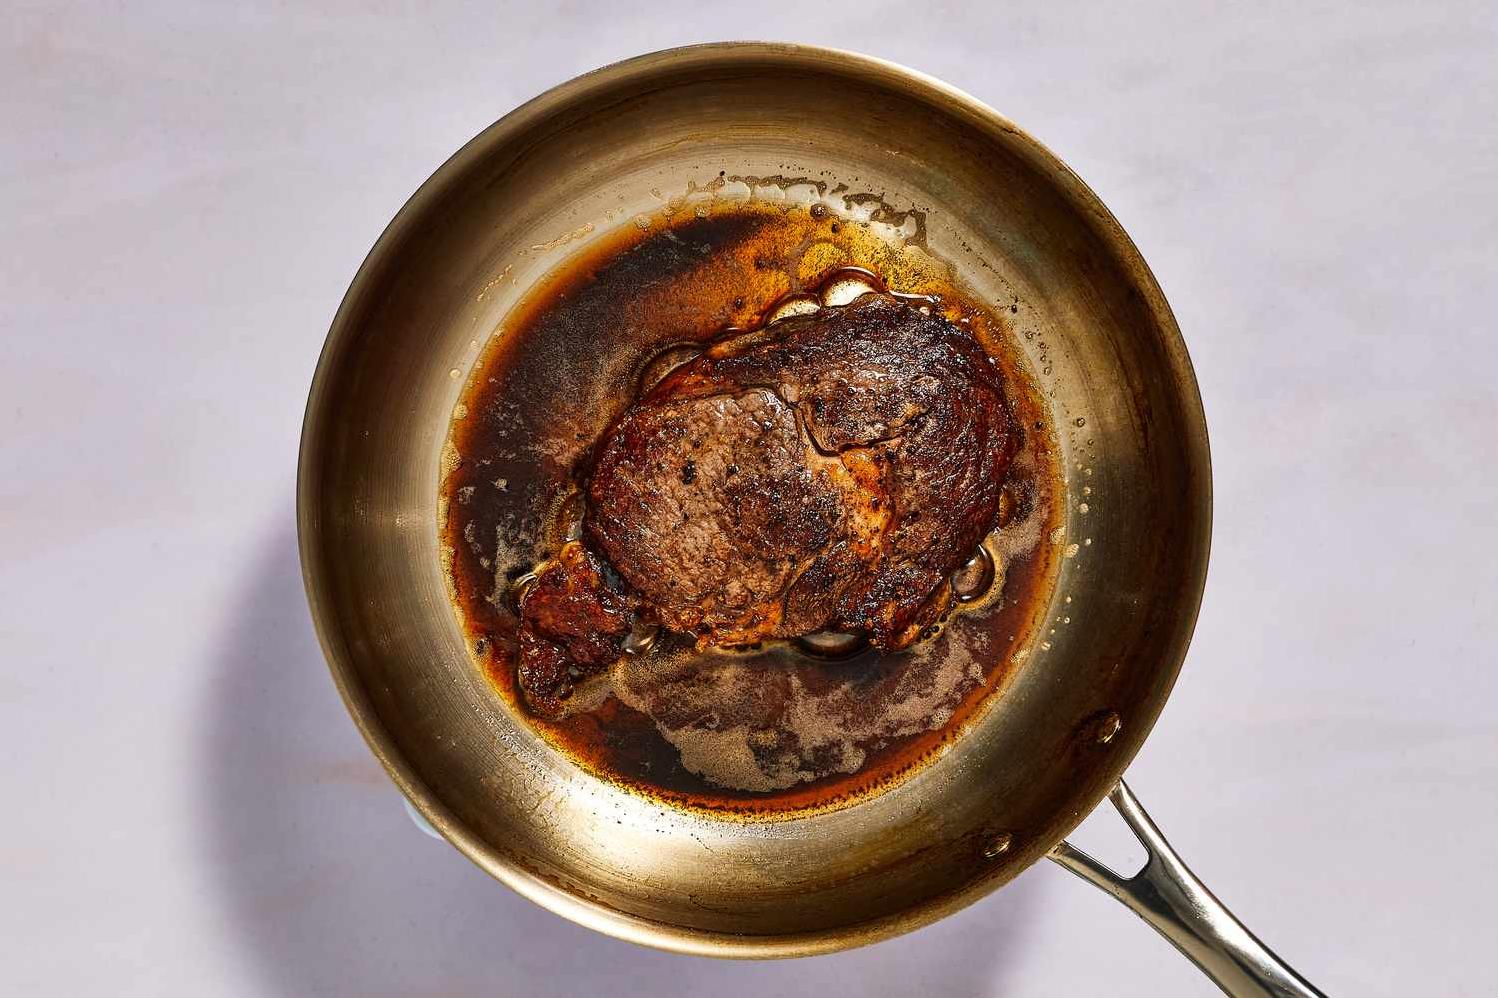  Savor the perfection of a tender steak au poivre with a rich, red wine sauce